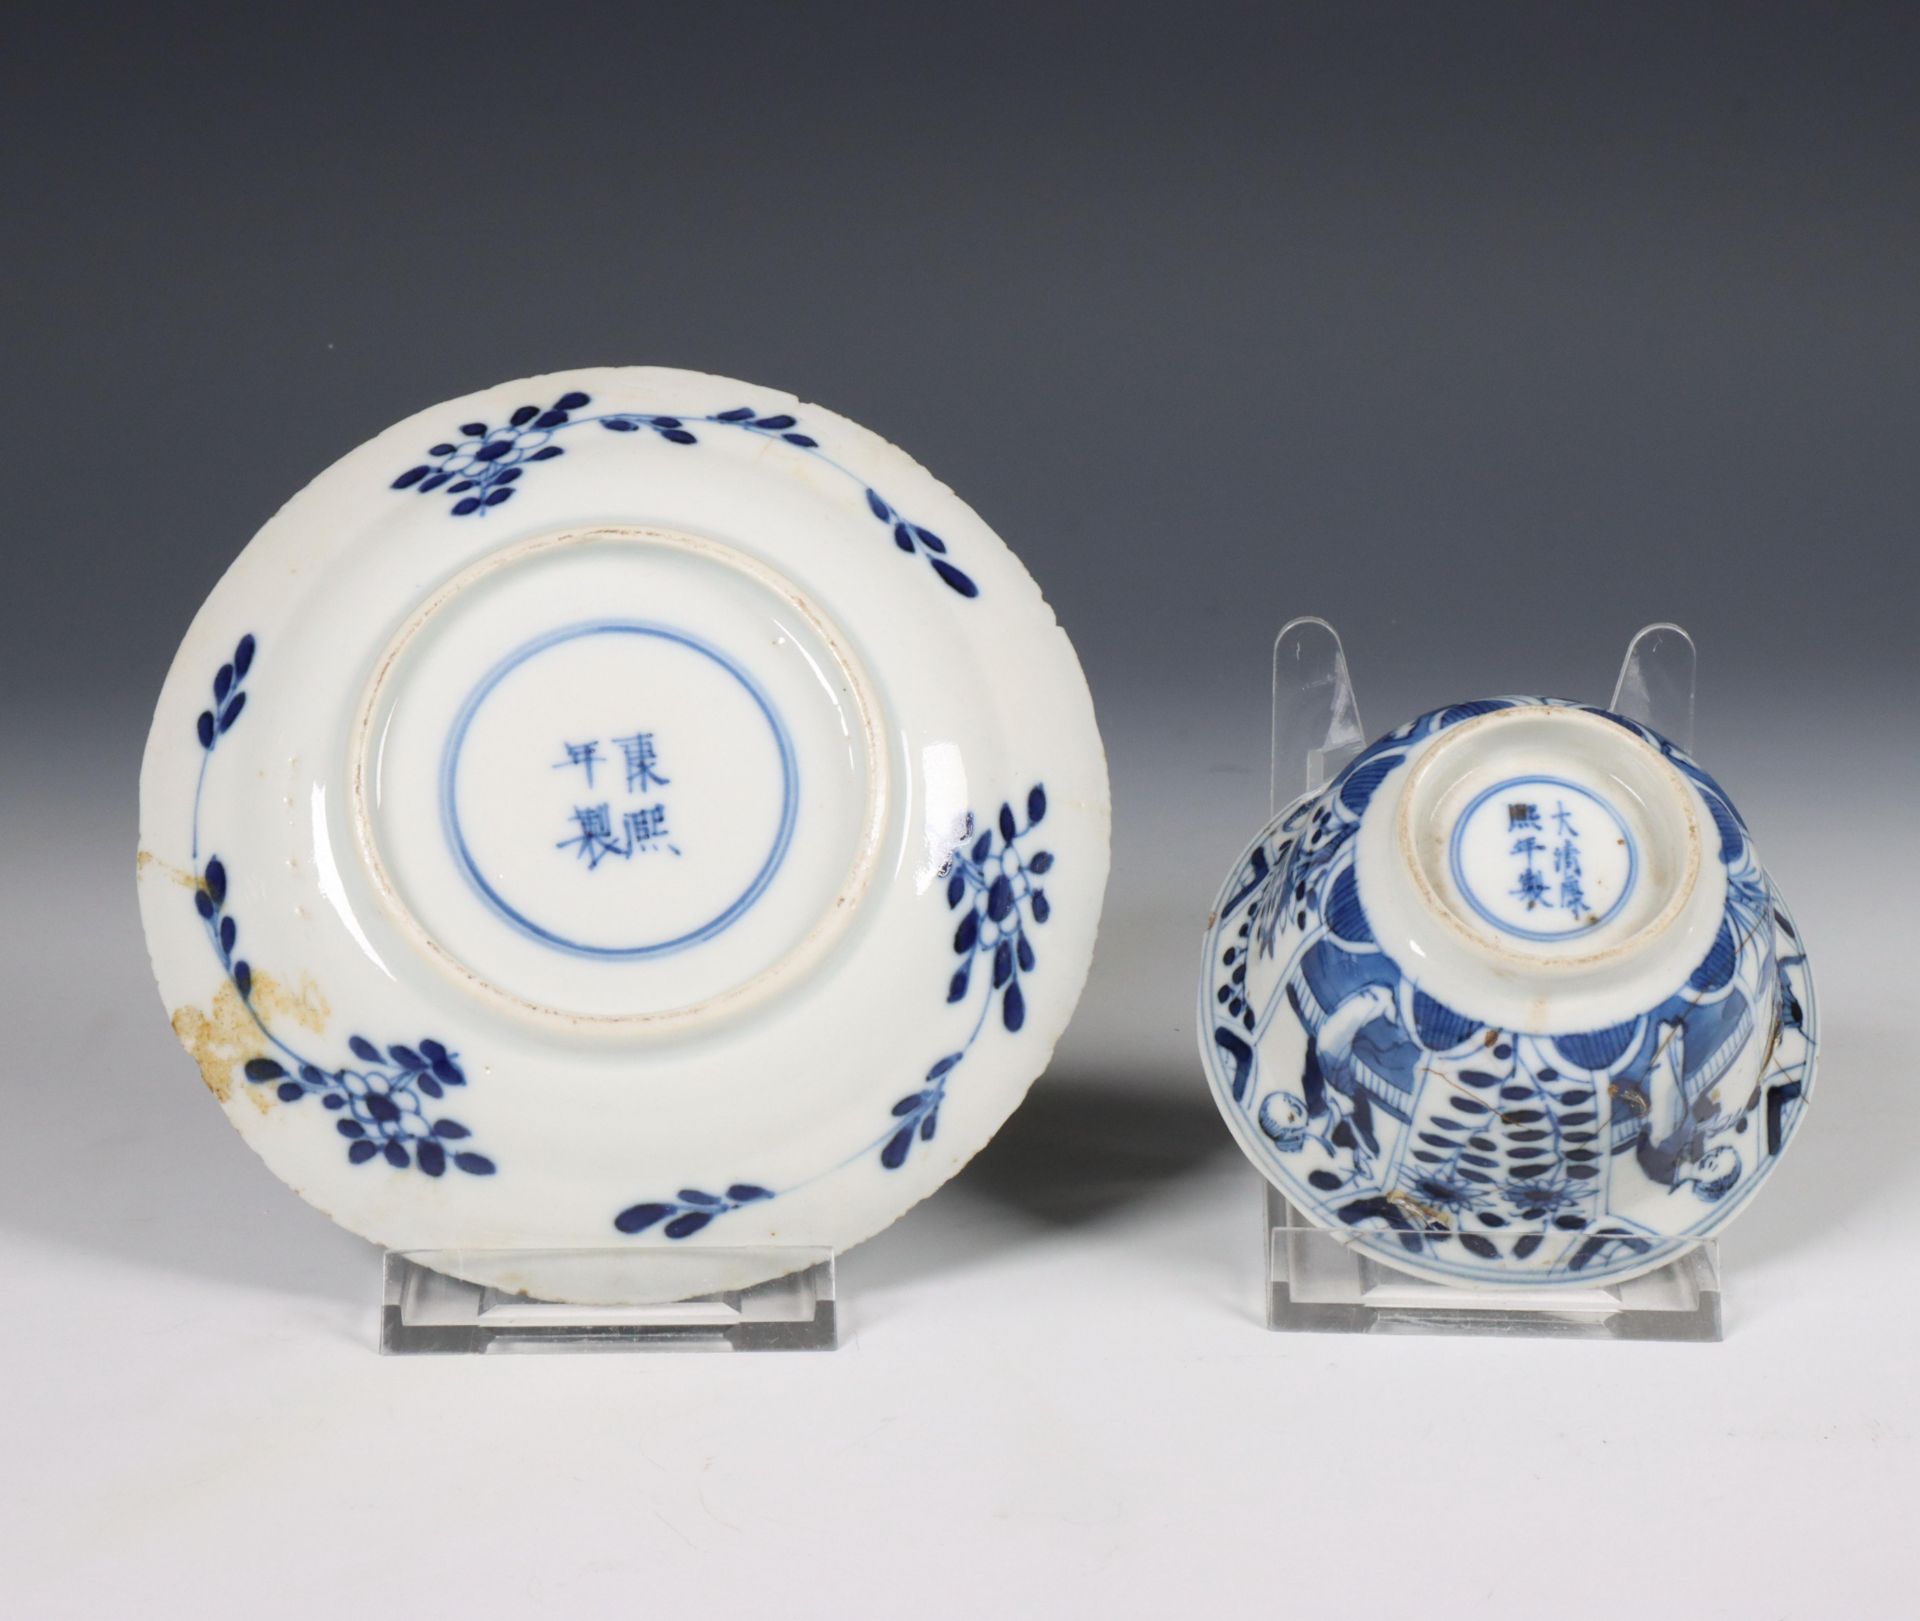 China, associated set of twelve blue and white porcelain tea bowls and eleven saucers, Kangxi period - Image 3 of 4